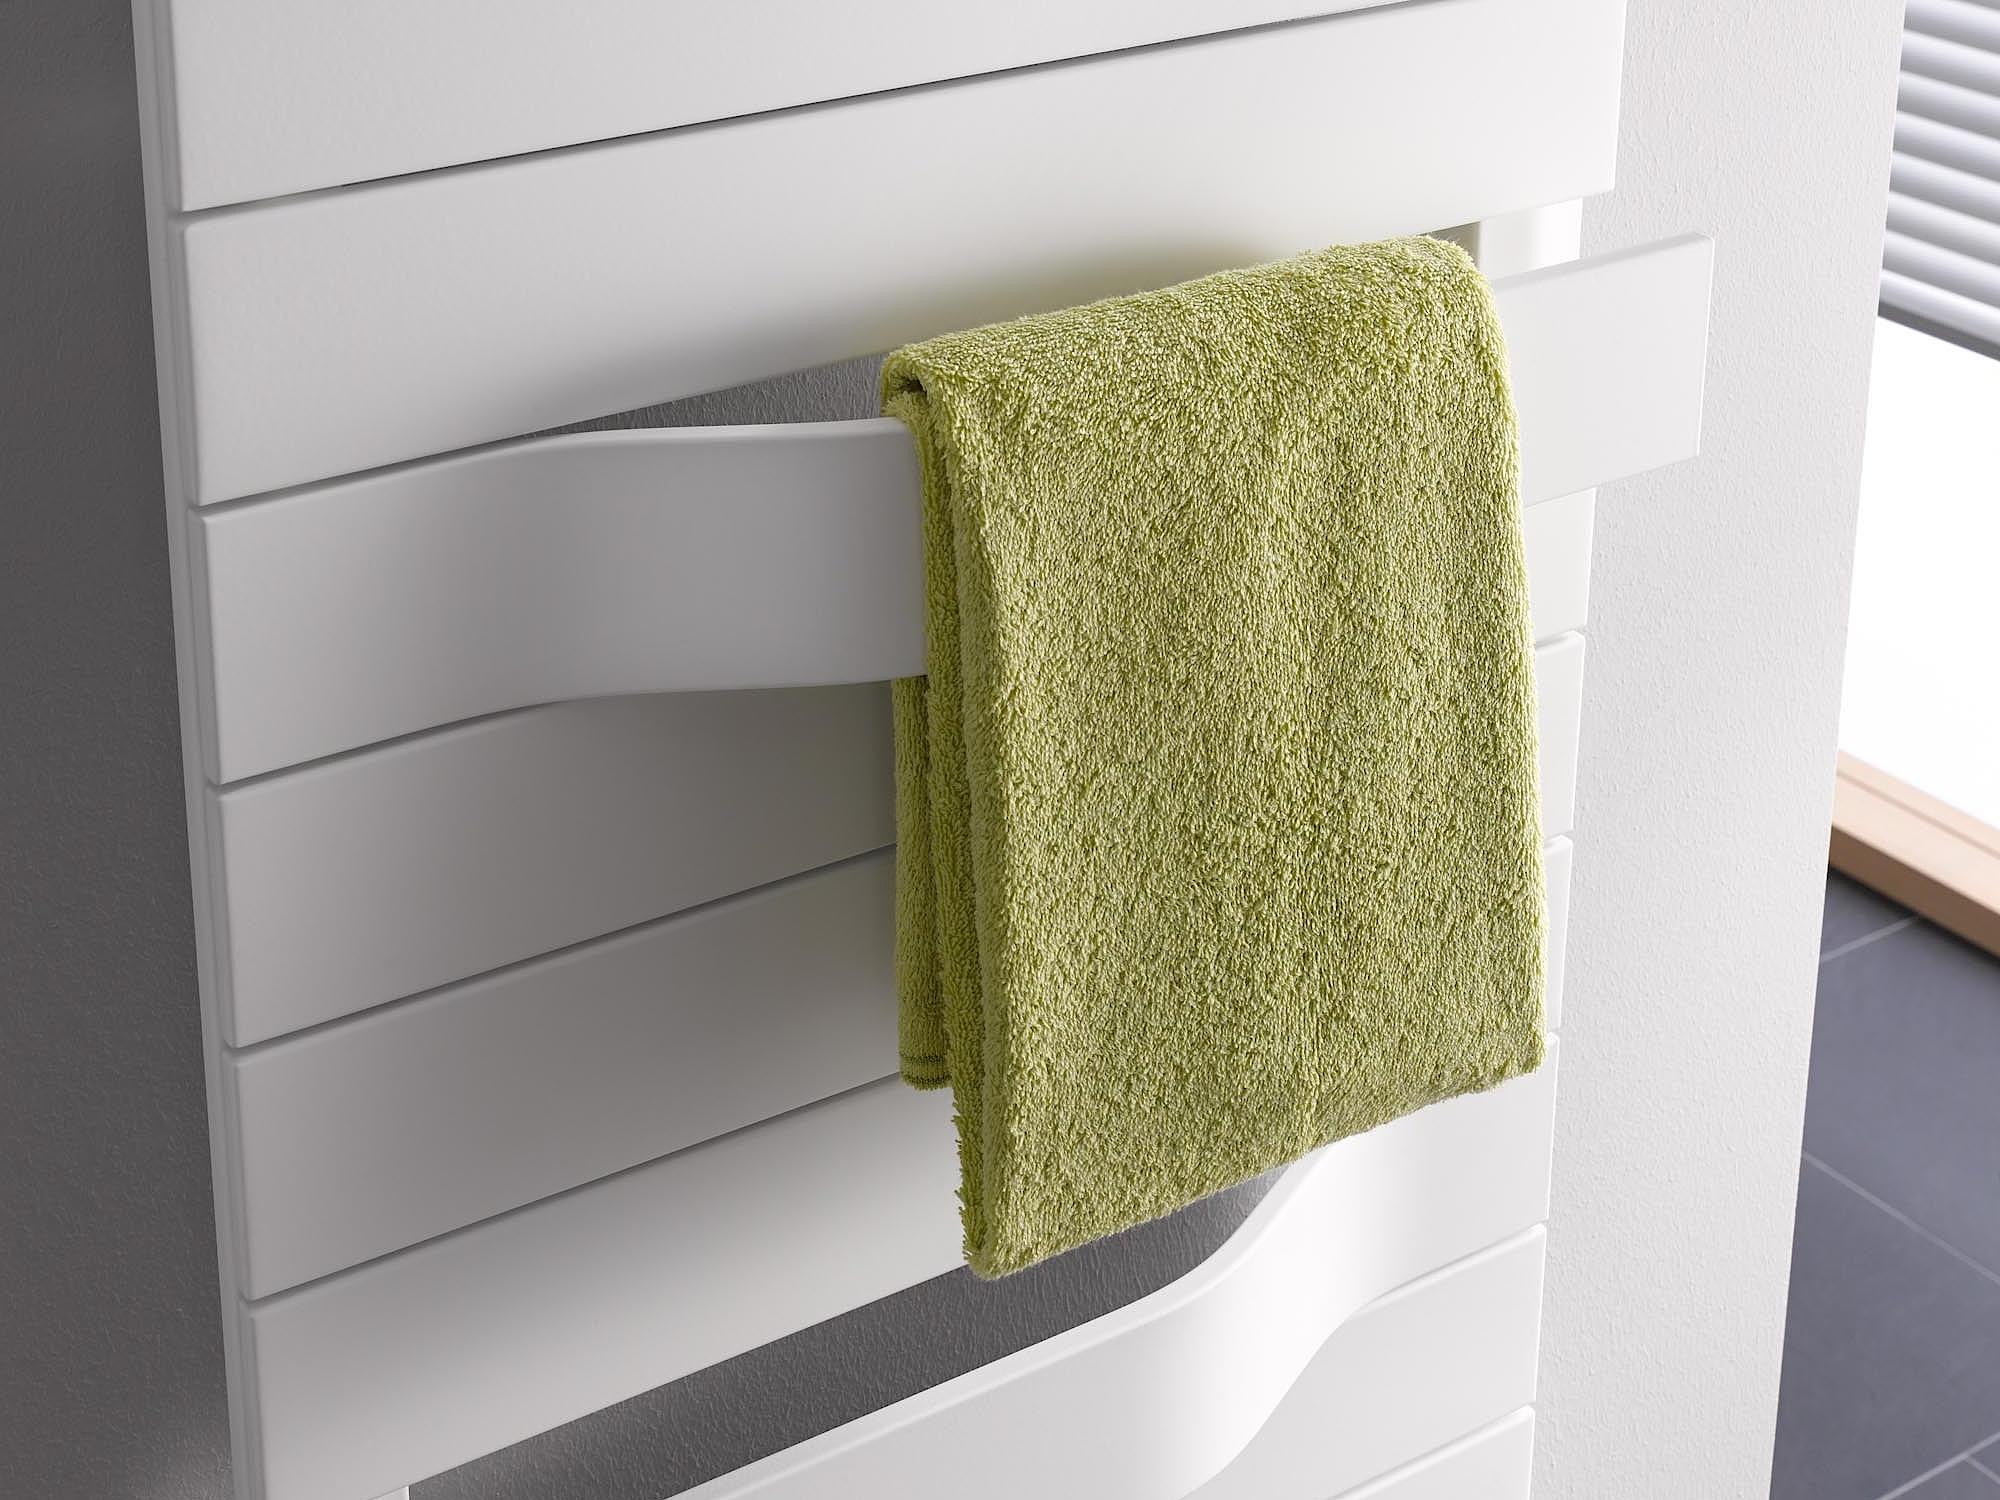 Kermi Tabeo designer and bathroom radiators with towel rails that protrude dynamically from the surface.